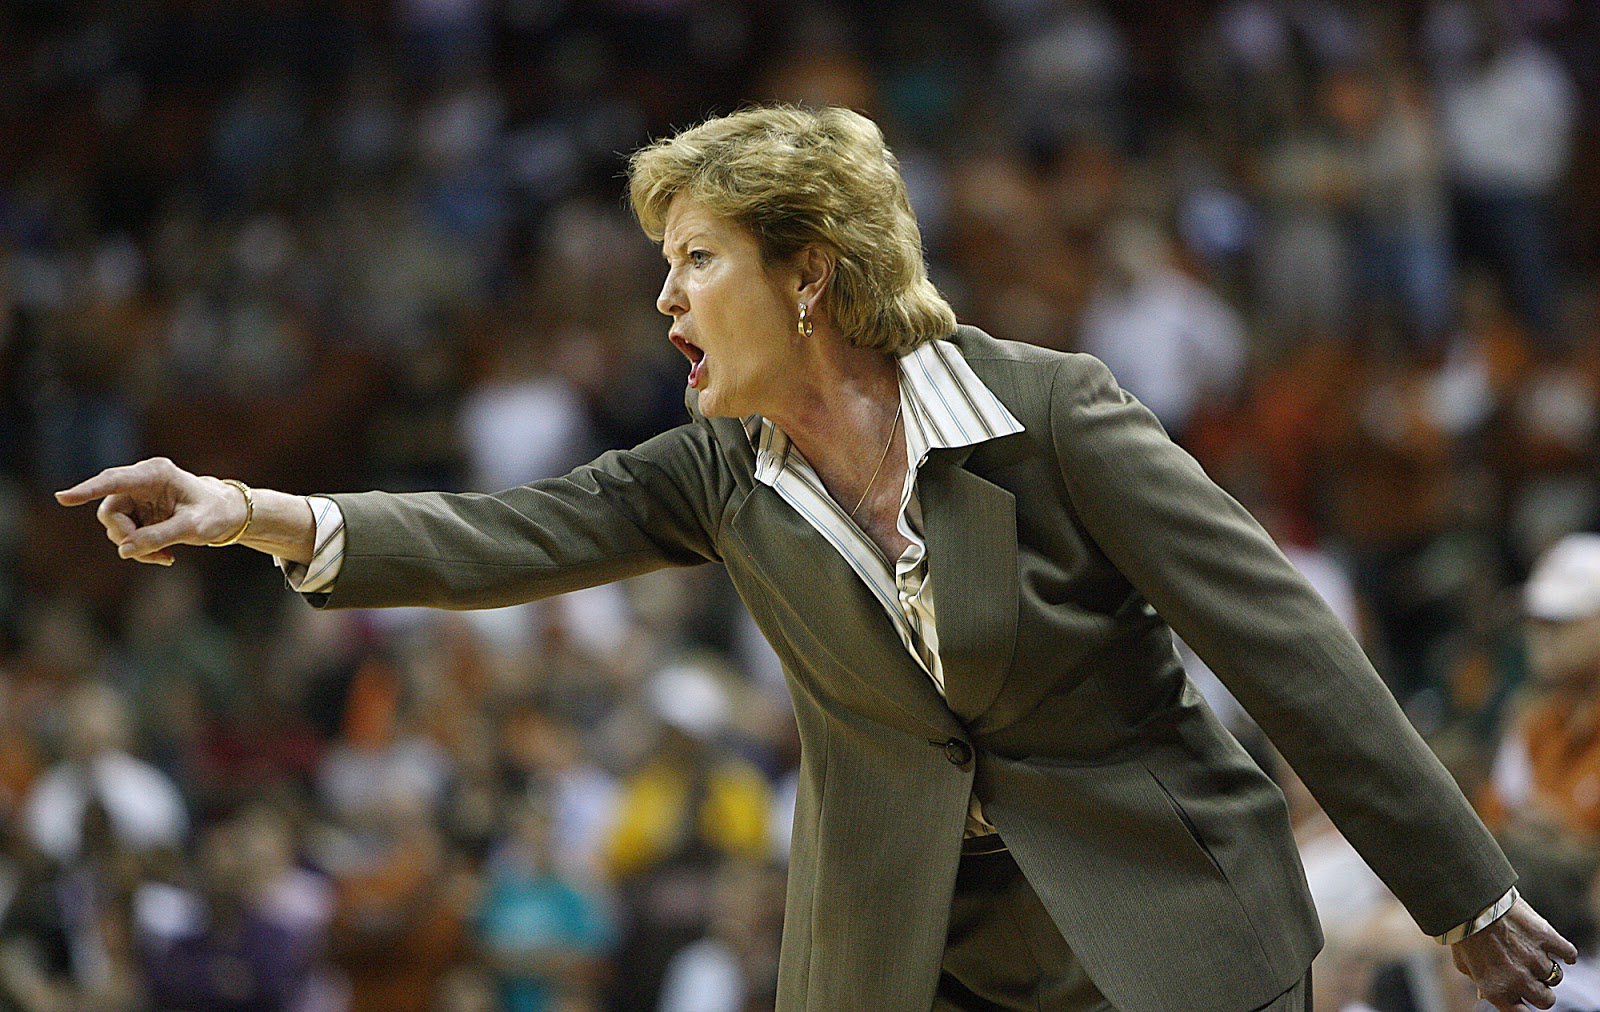 HOOP THOUGHTS: PAT SUMMITT ON COMPETING (PART I)